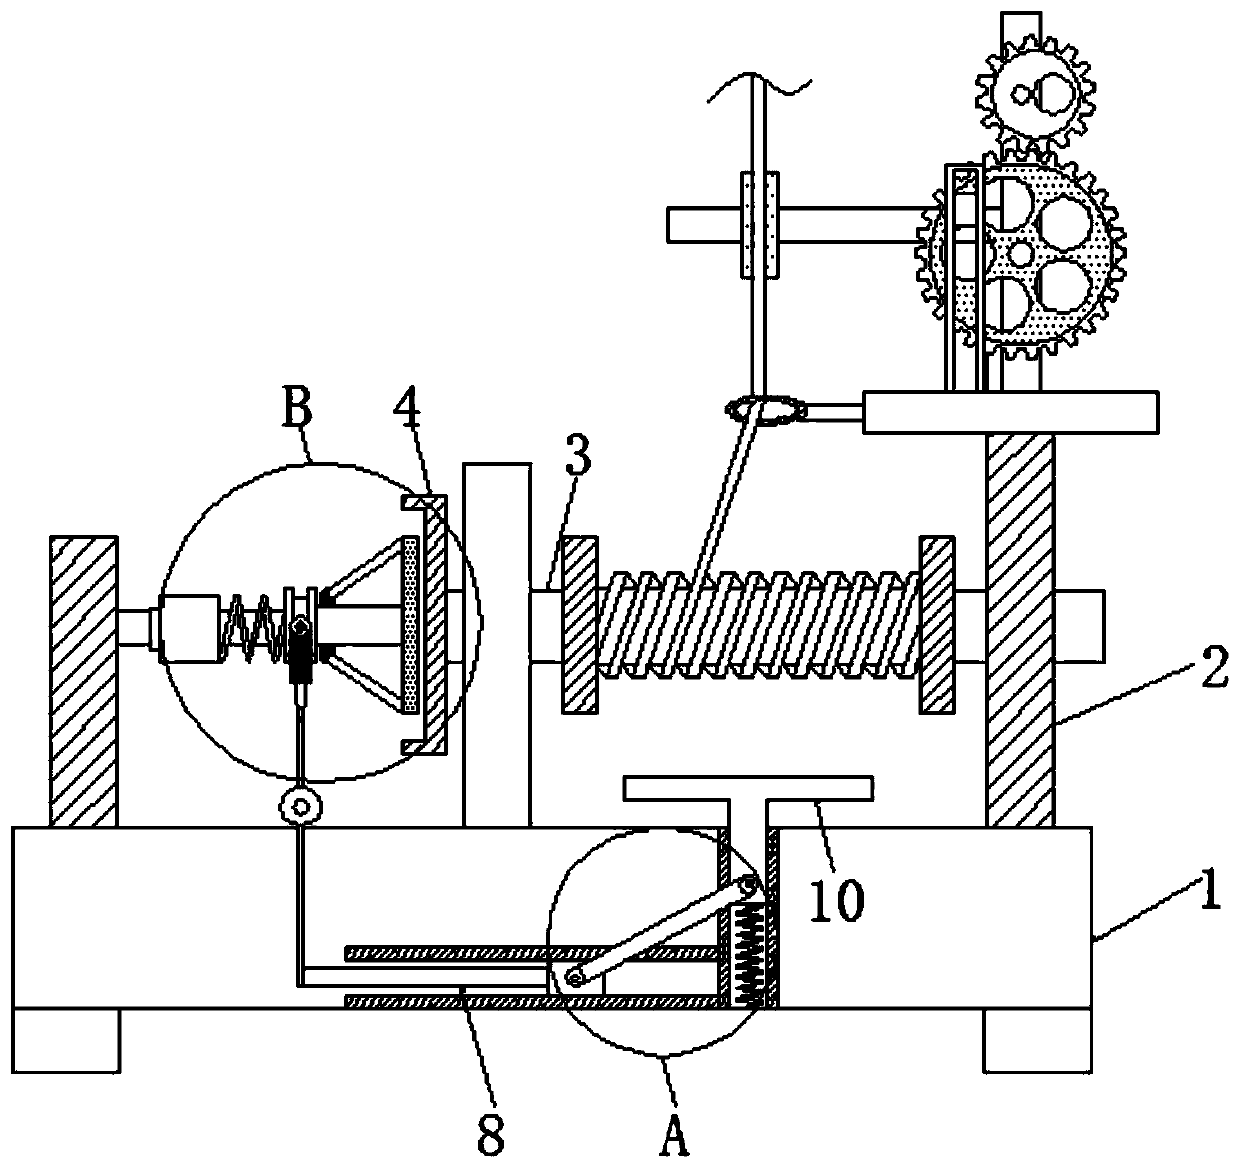 Spinning winding device capable of achieving quantitative winding and uniform winding based on reciprocating motion